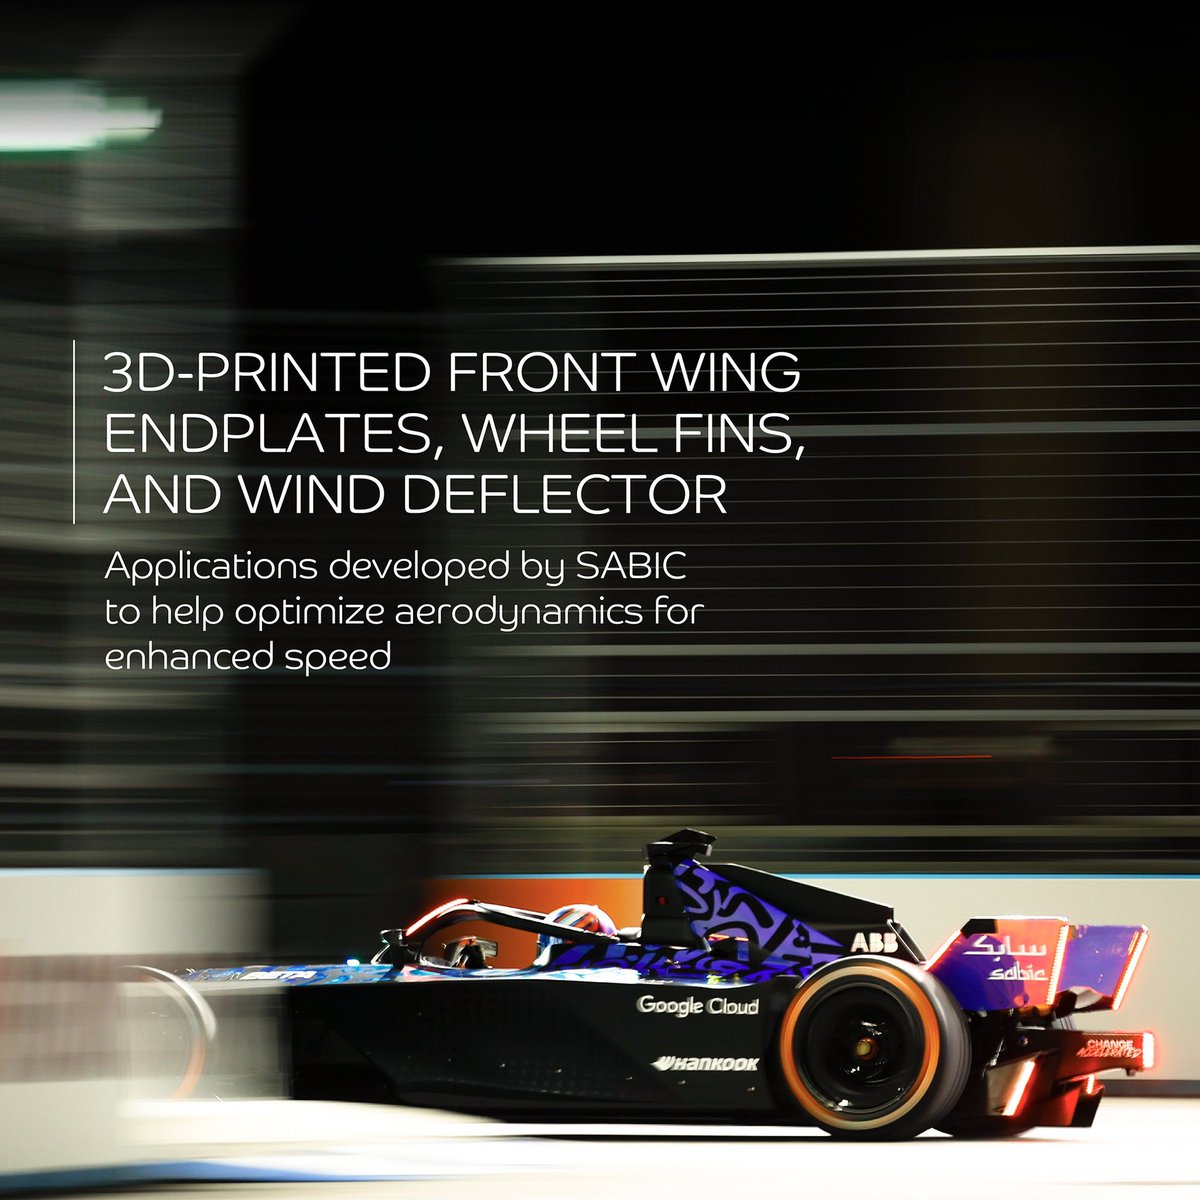 #SABIC is an integral partner in the #GENBETA program in collaboration with @FIAFormulaE, enabling the revolutionary GENBETA car to break barriers through authentic material integration ⚡️🏁 #FormulaE #MisanoEPrix